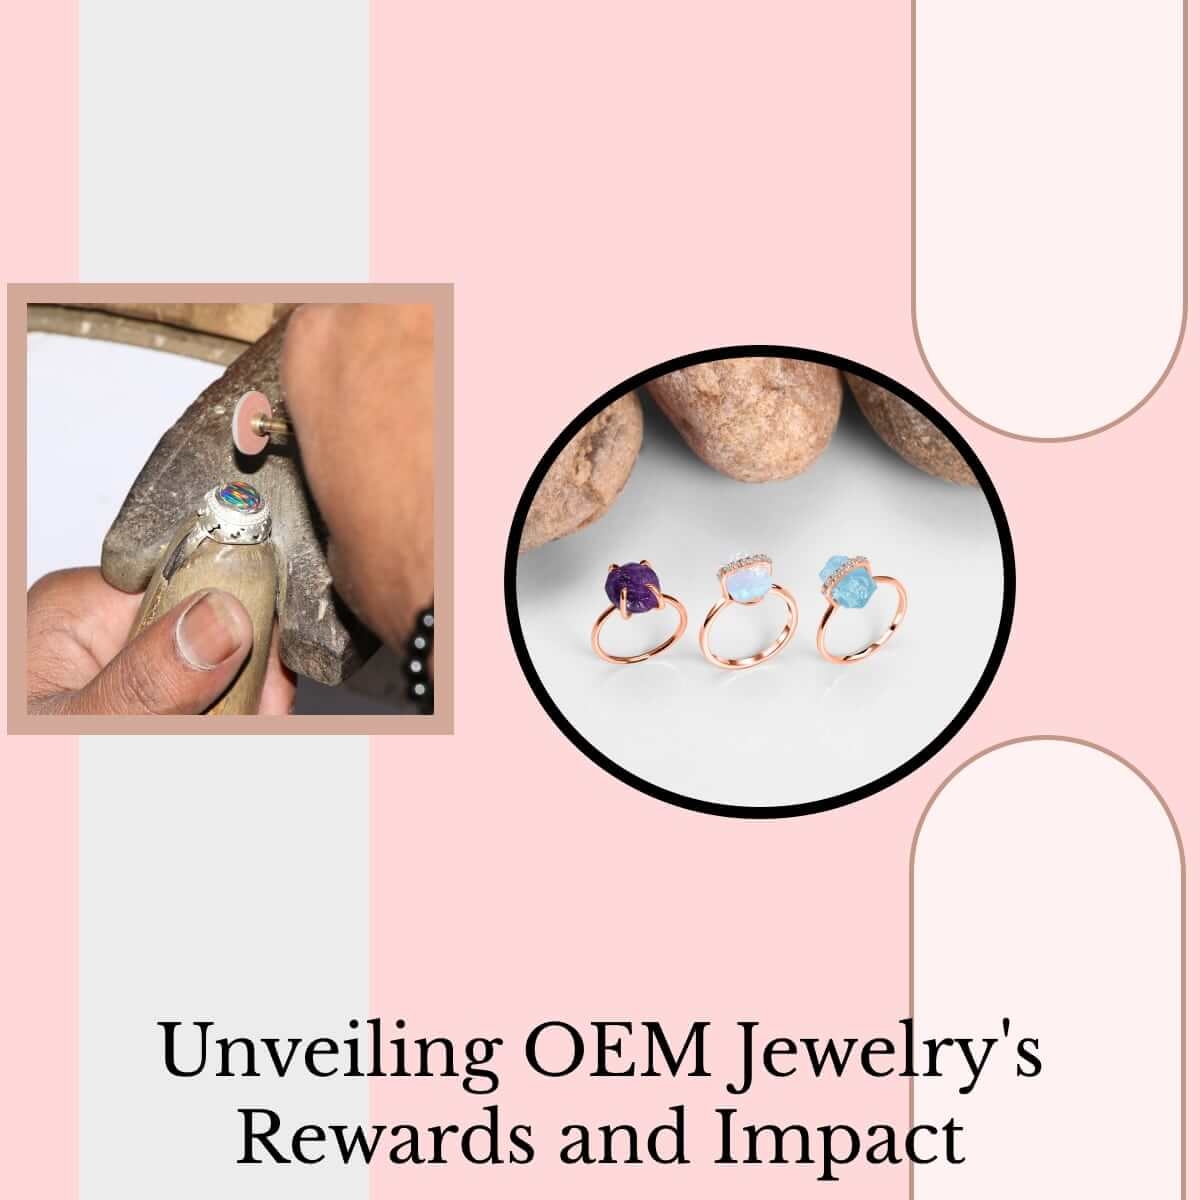 Significance and Benefits of OEM Jewelry Manufacturing